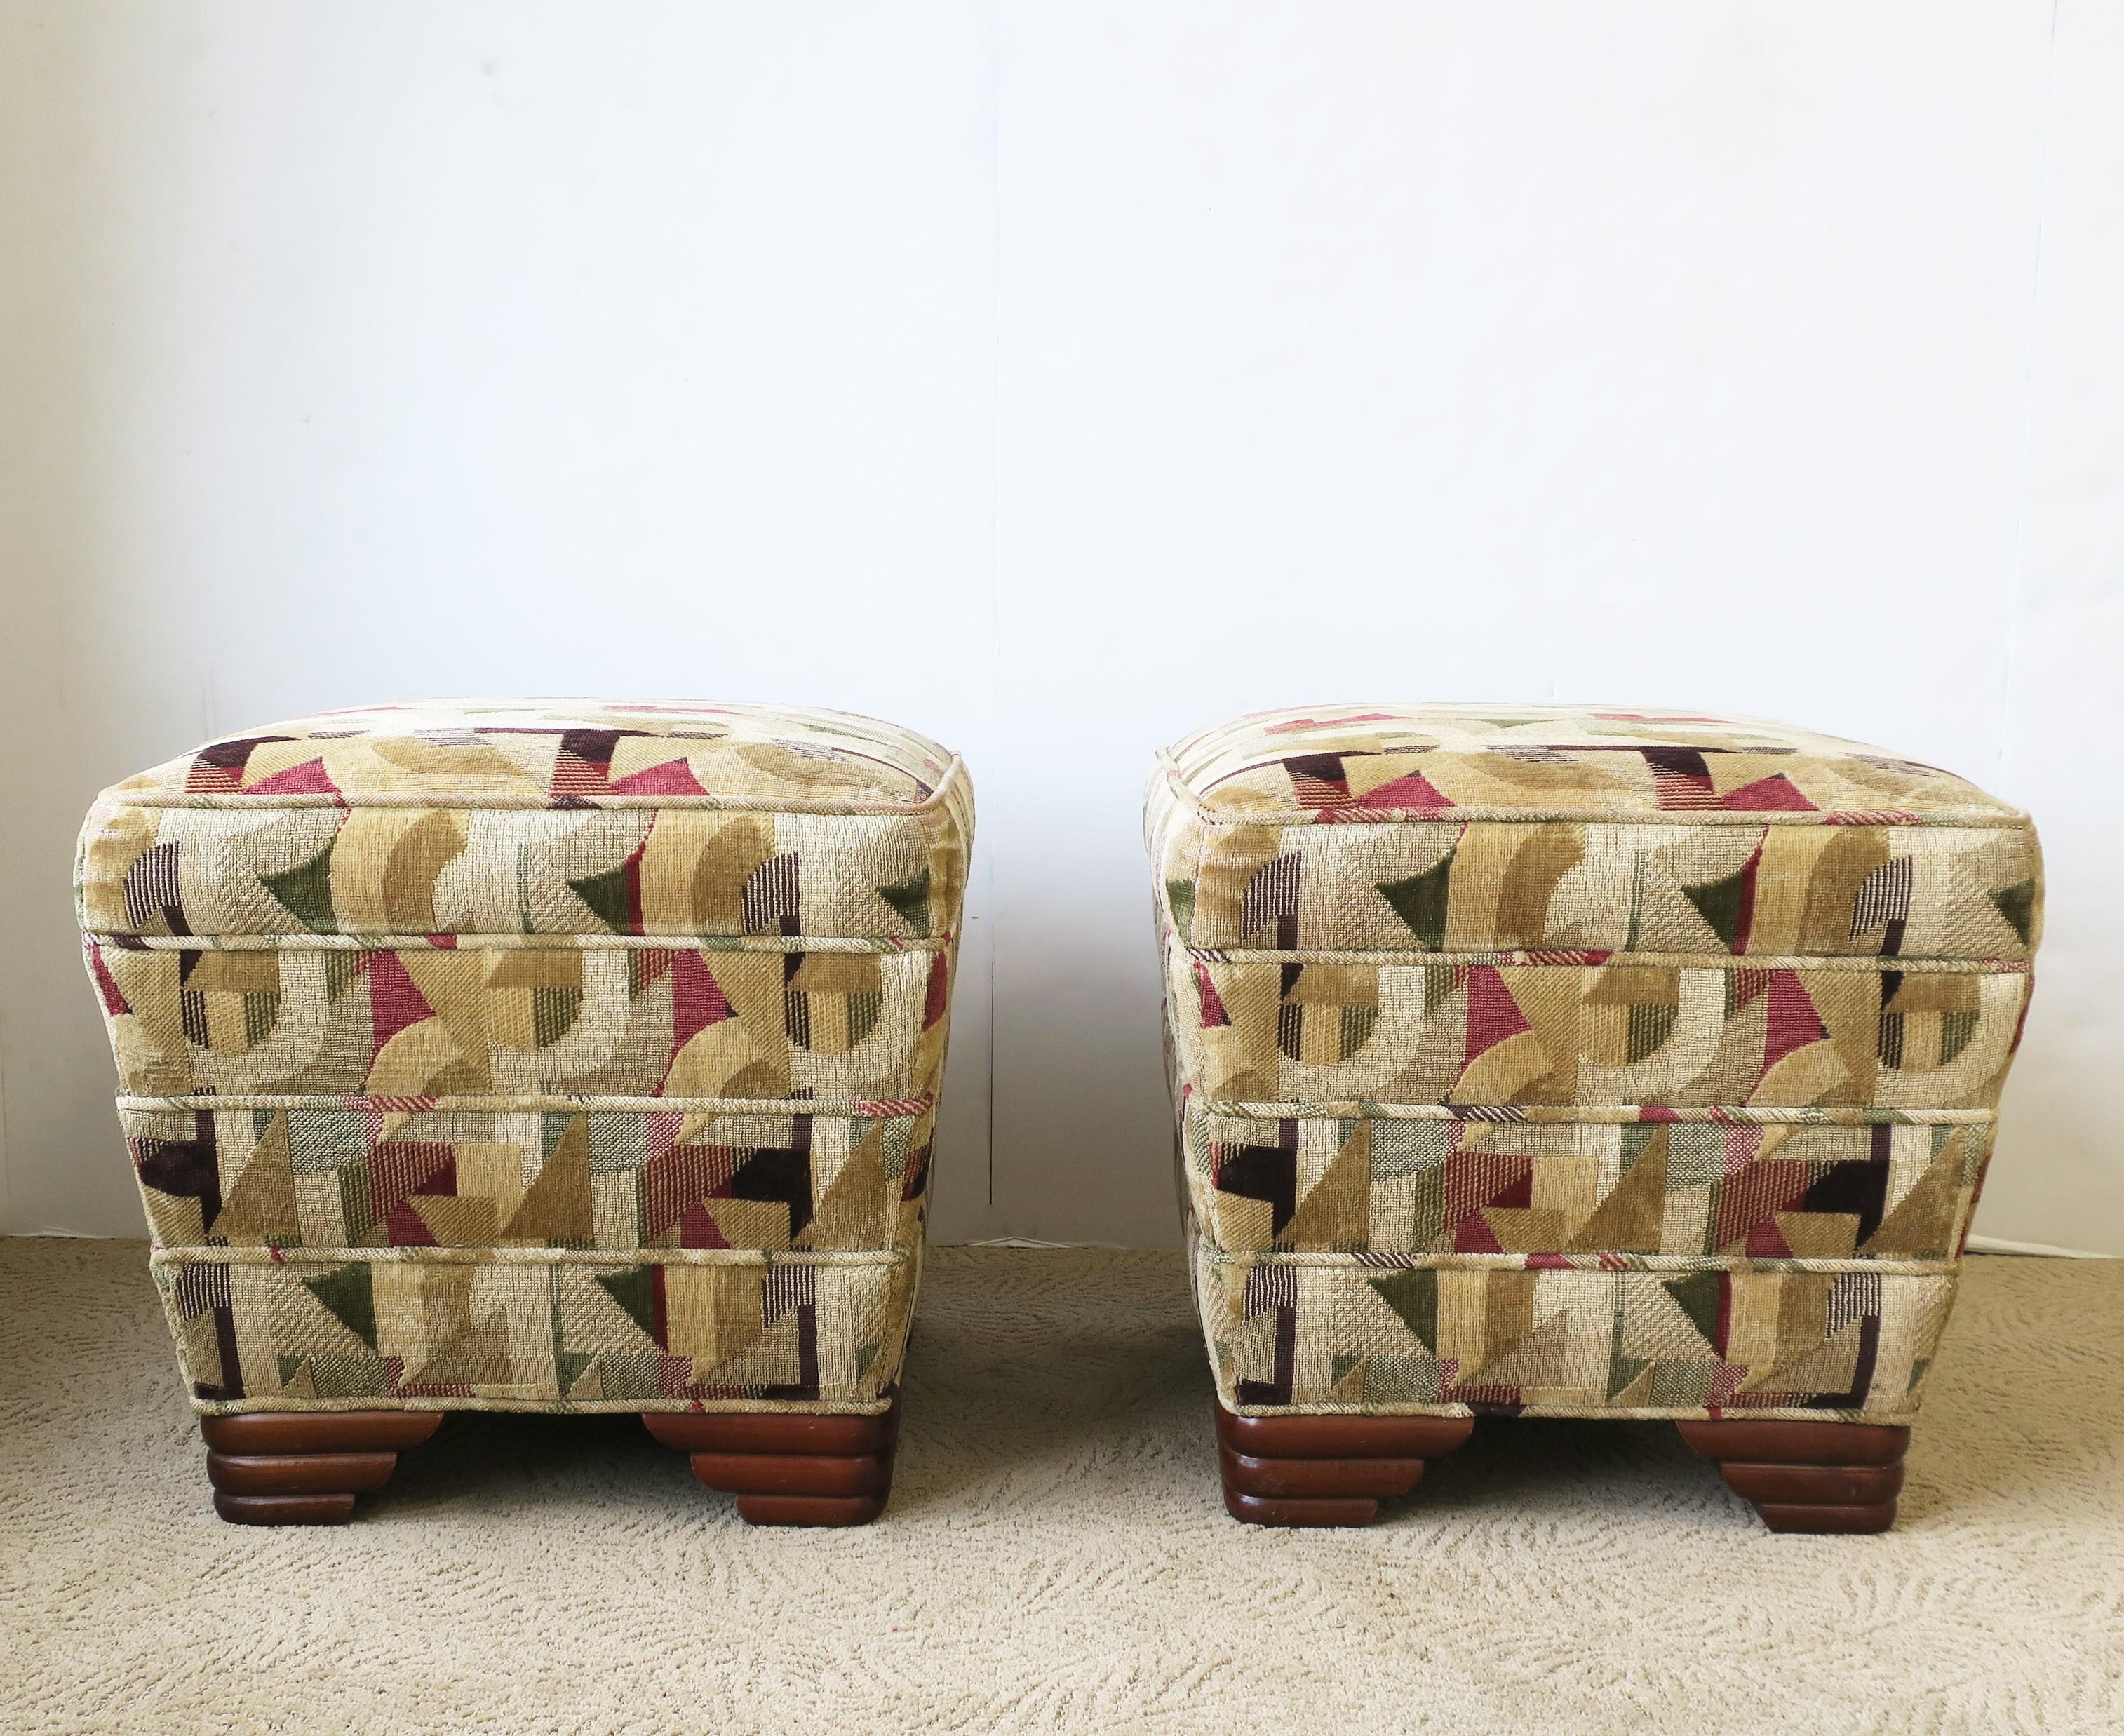 20th Century Art Deco Upholstered Stools or Benches, Pair